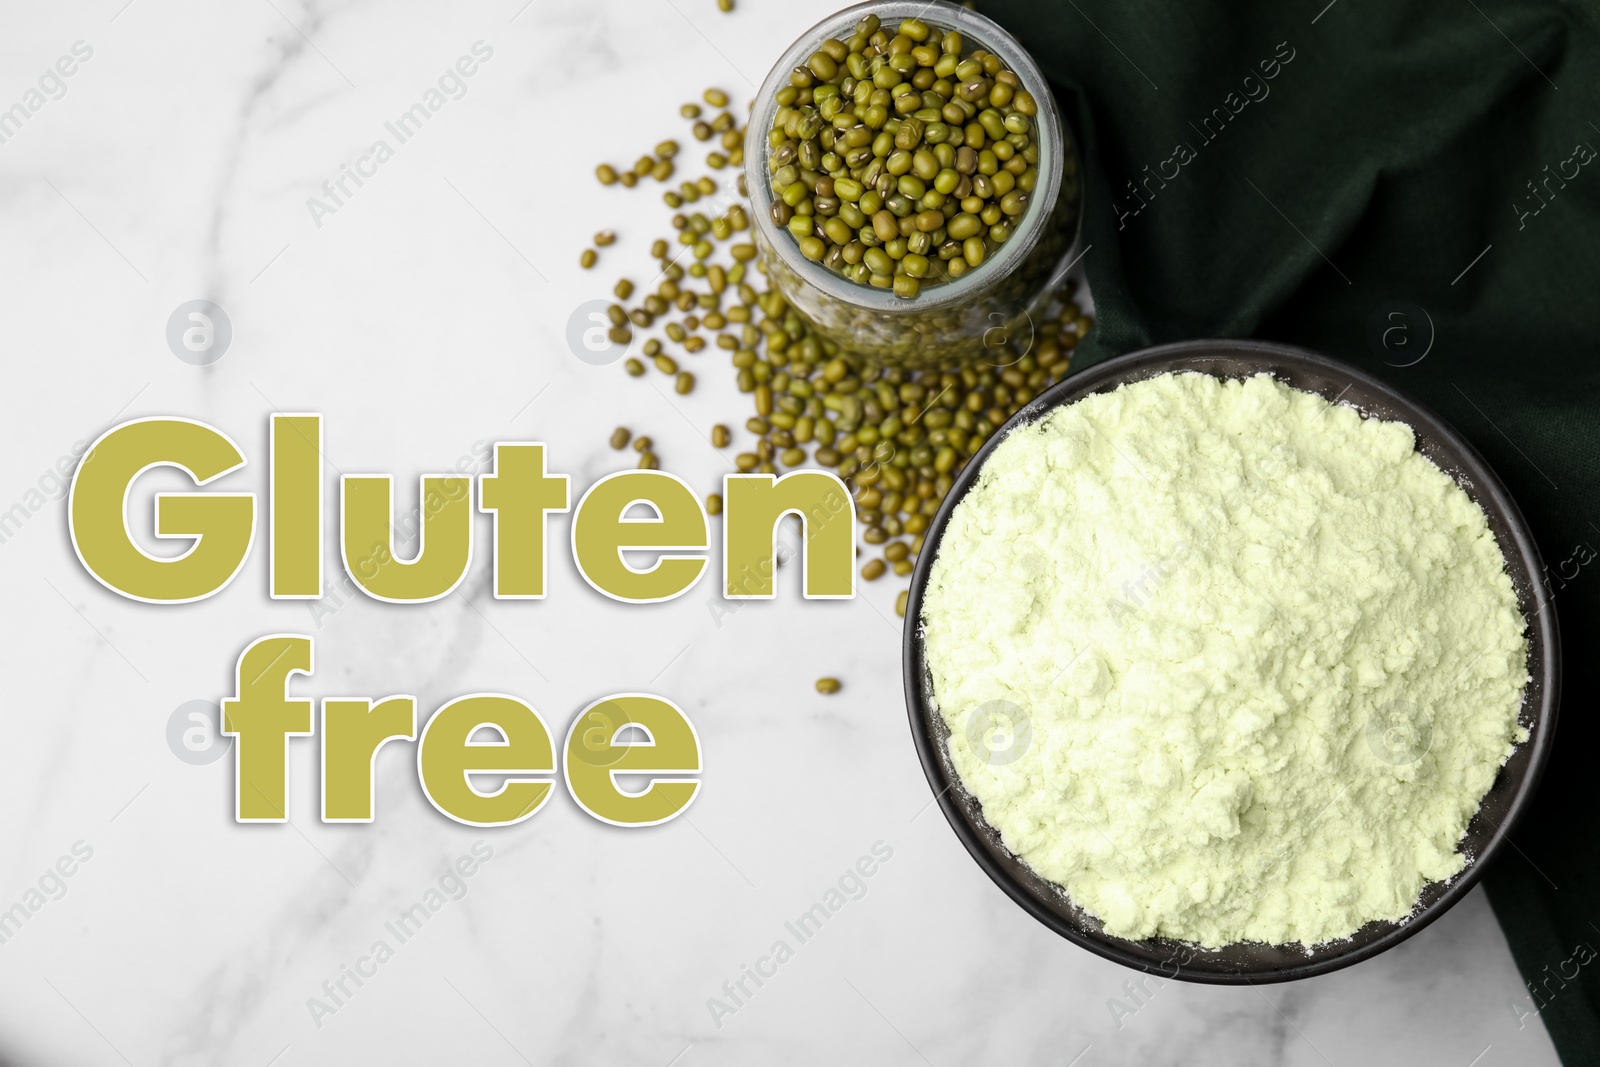 Image of Gluten free products. Mung bean flour in bowl and text on white marble table, top view